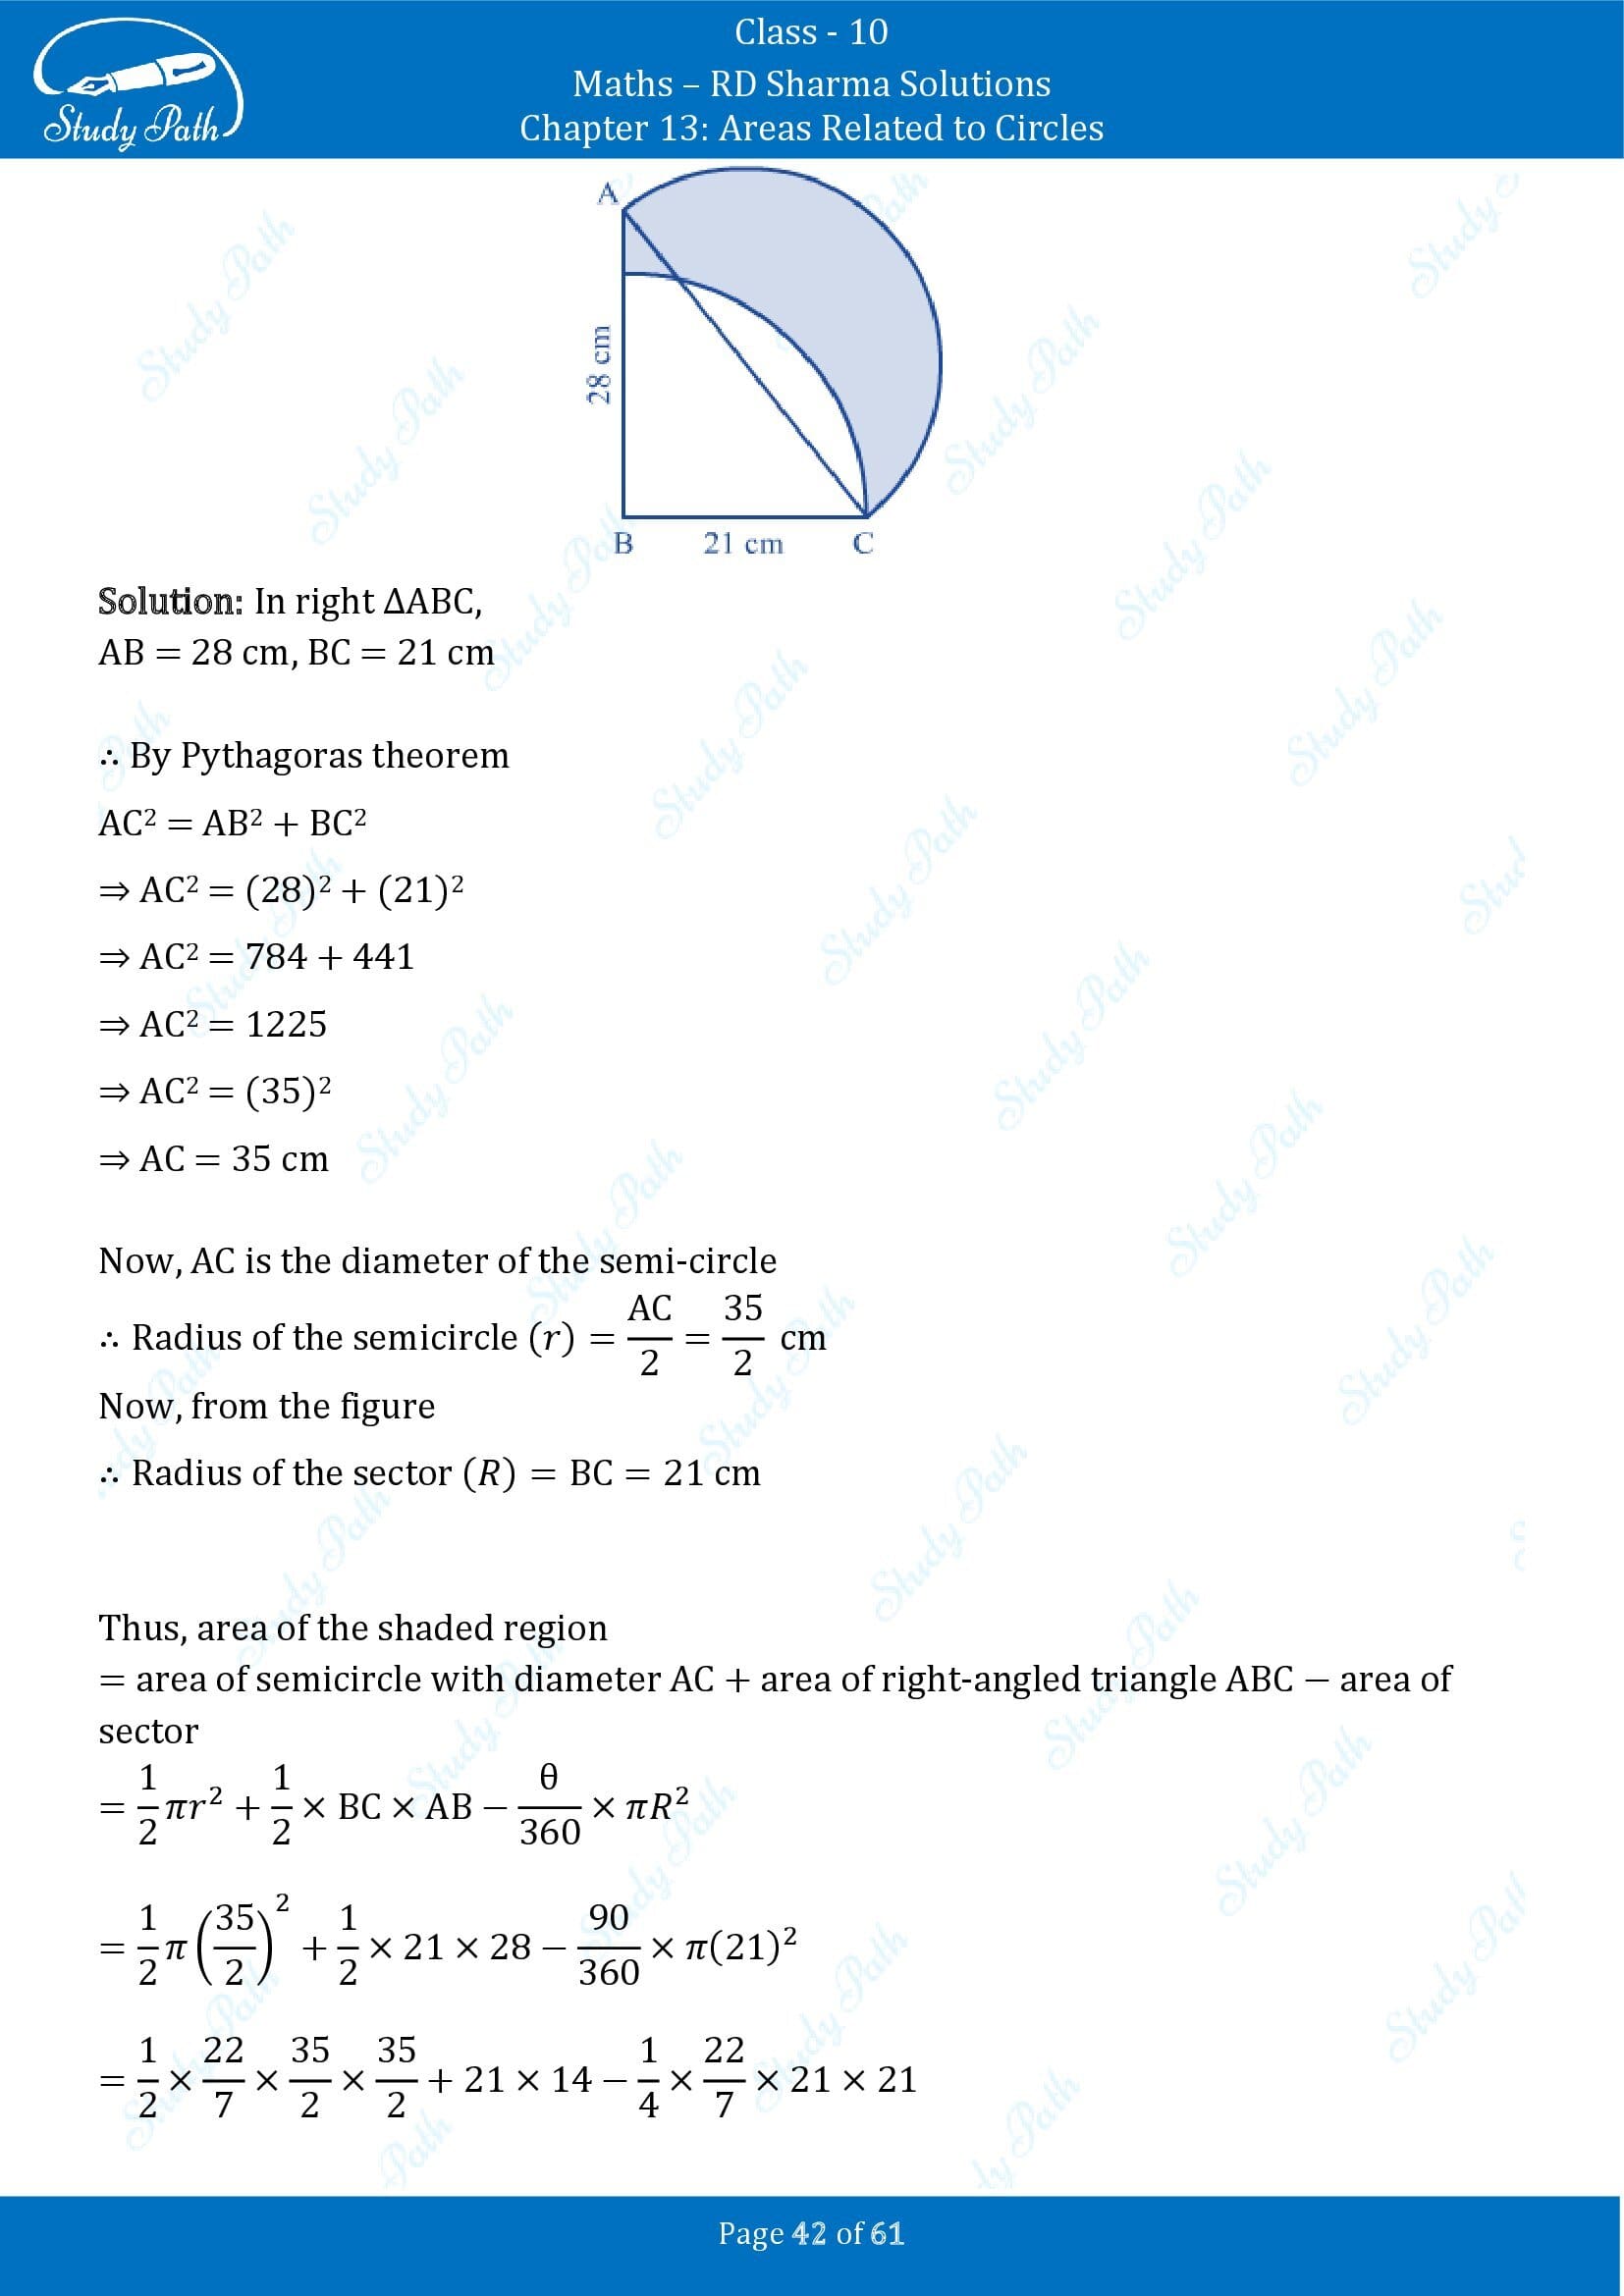 RD Sharma Solutions Class 10 Chapter 13 Areas Related to Circles Exercise 13.4 00042